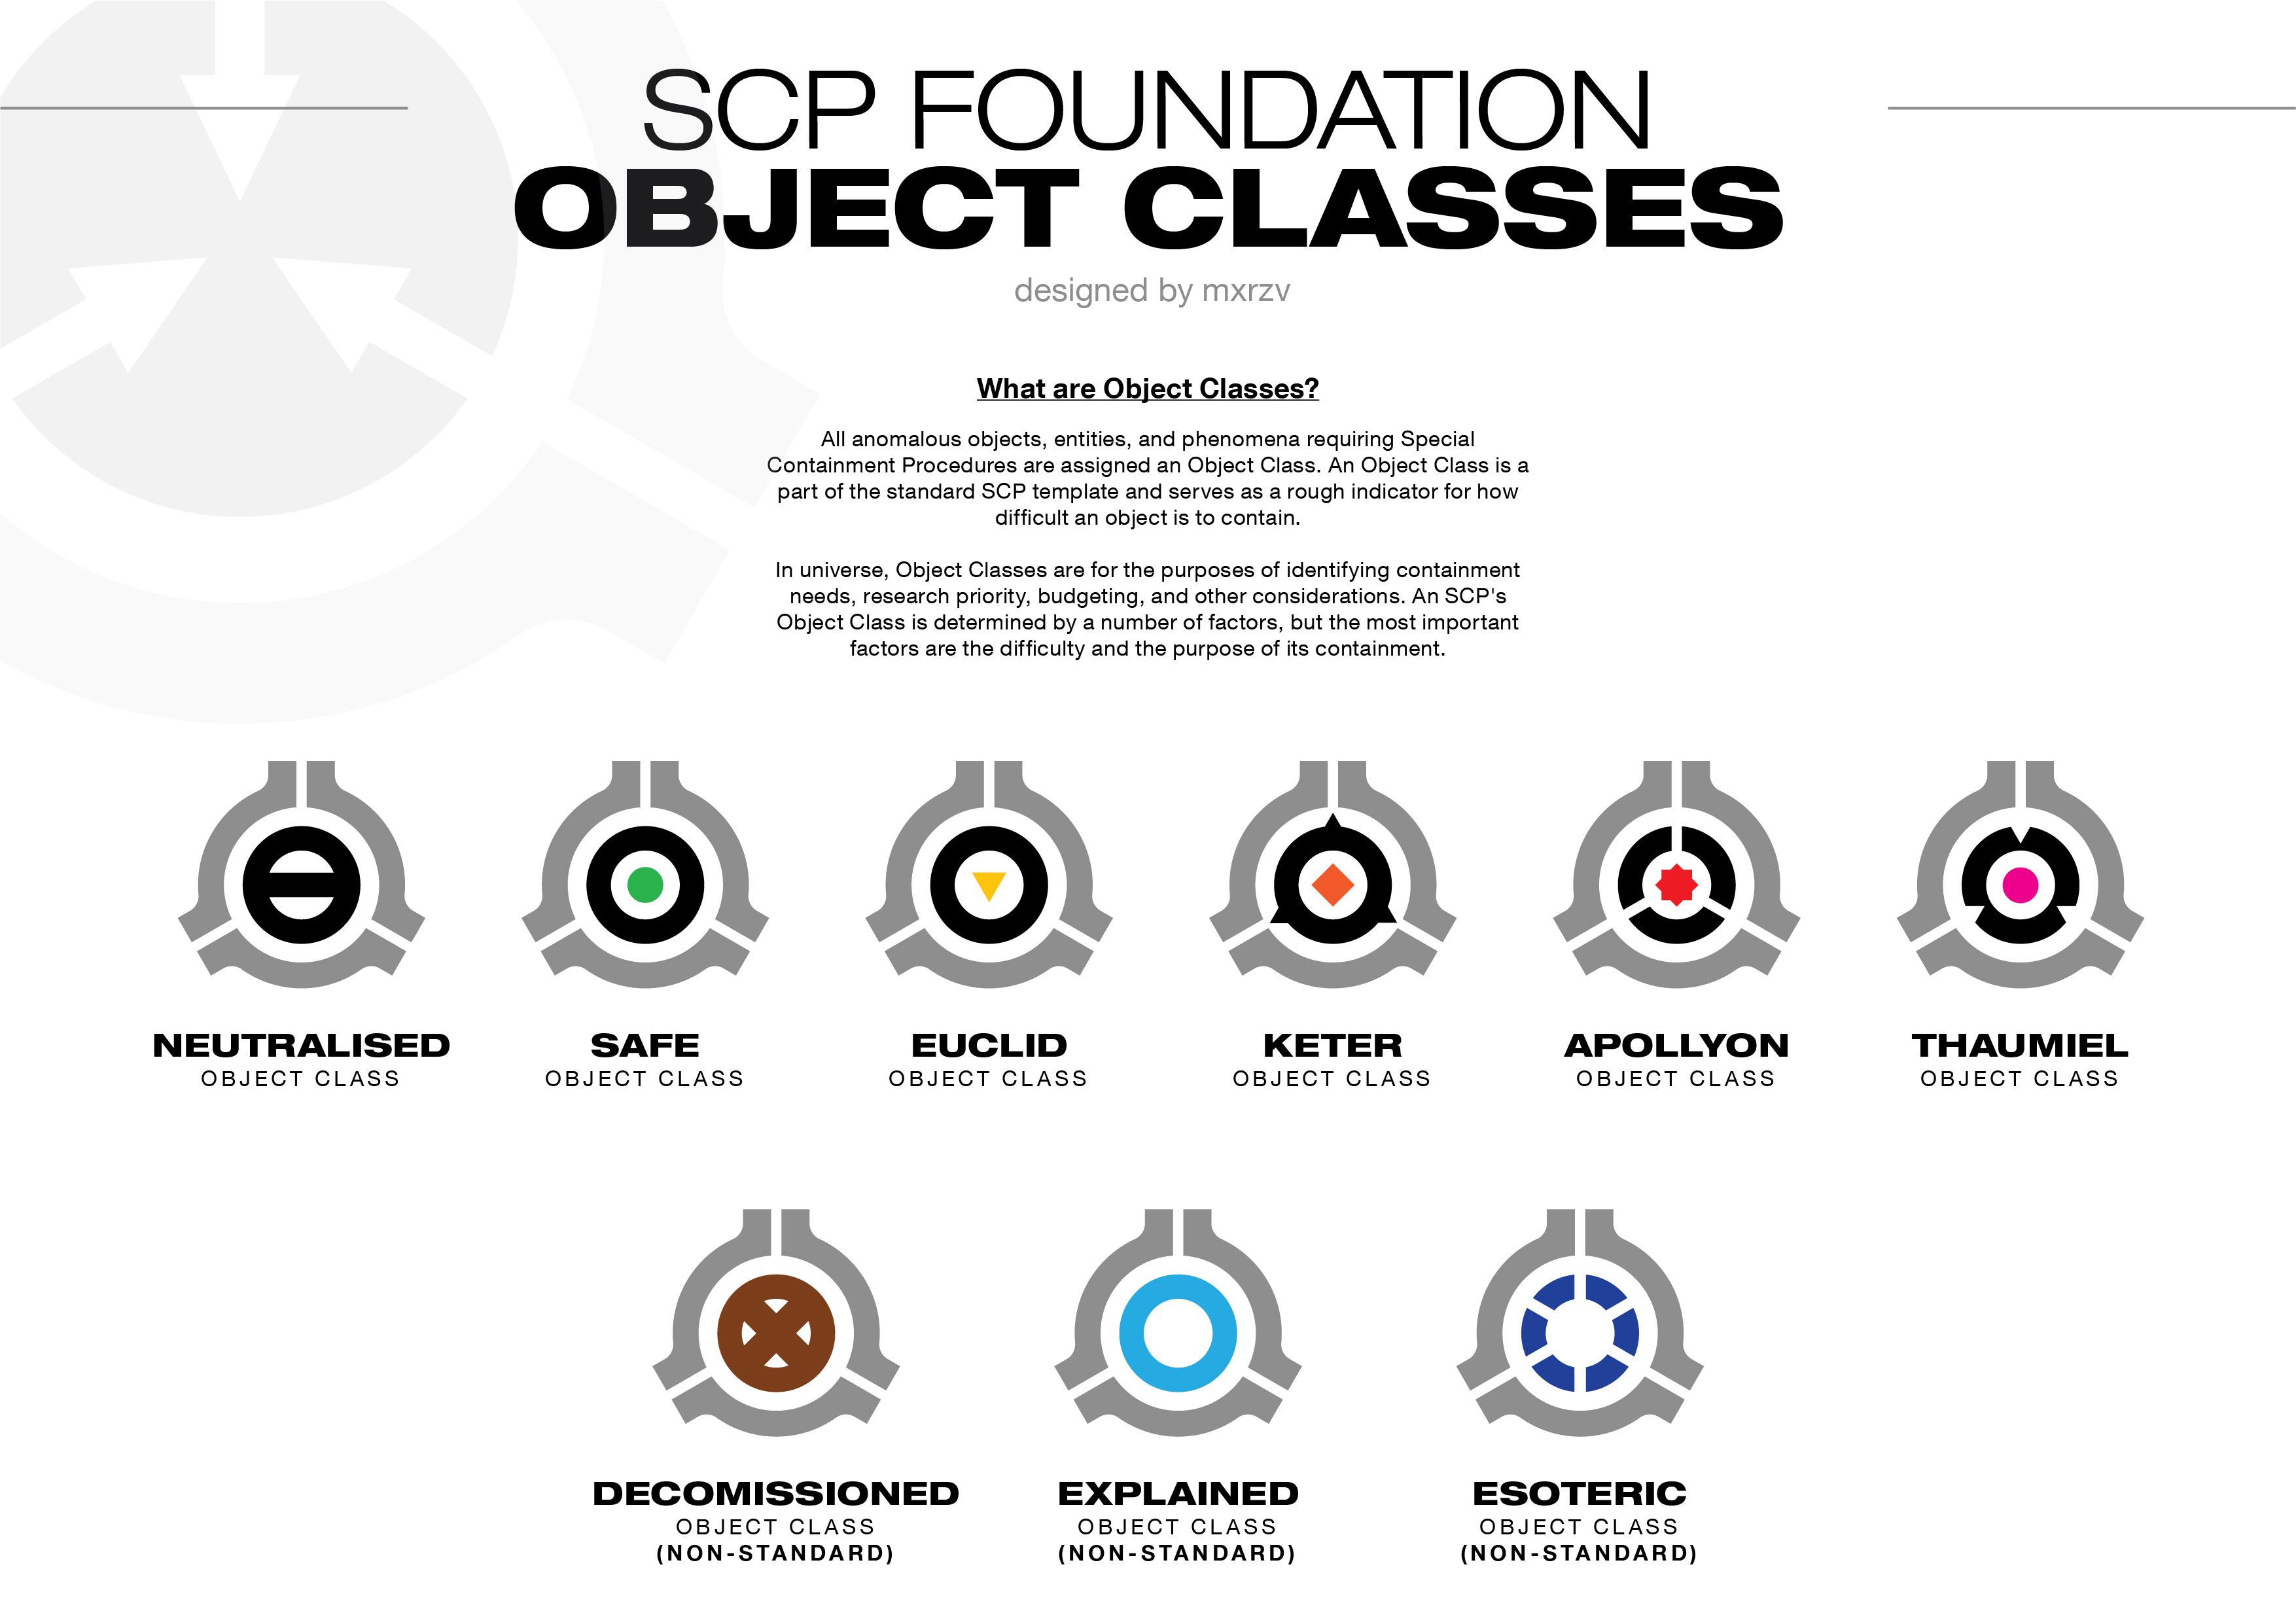 Explaining the Containment classes and secondary class of the SCP Foundation, Object classes